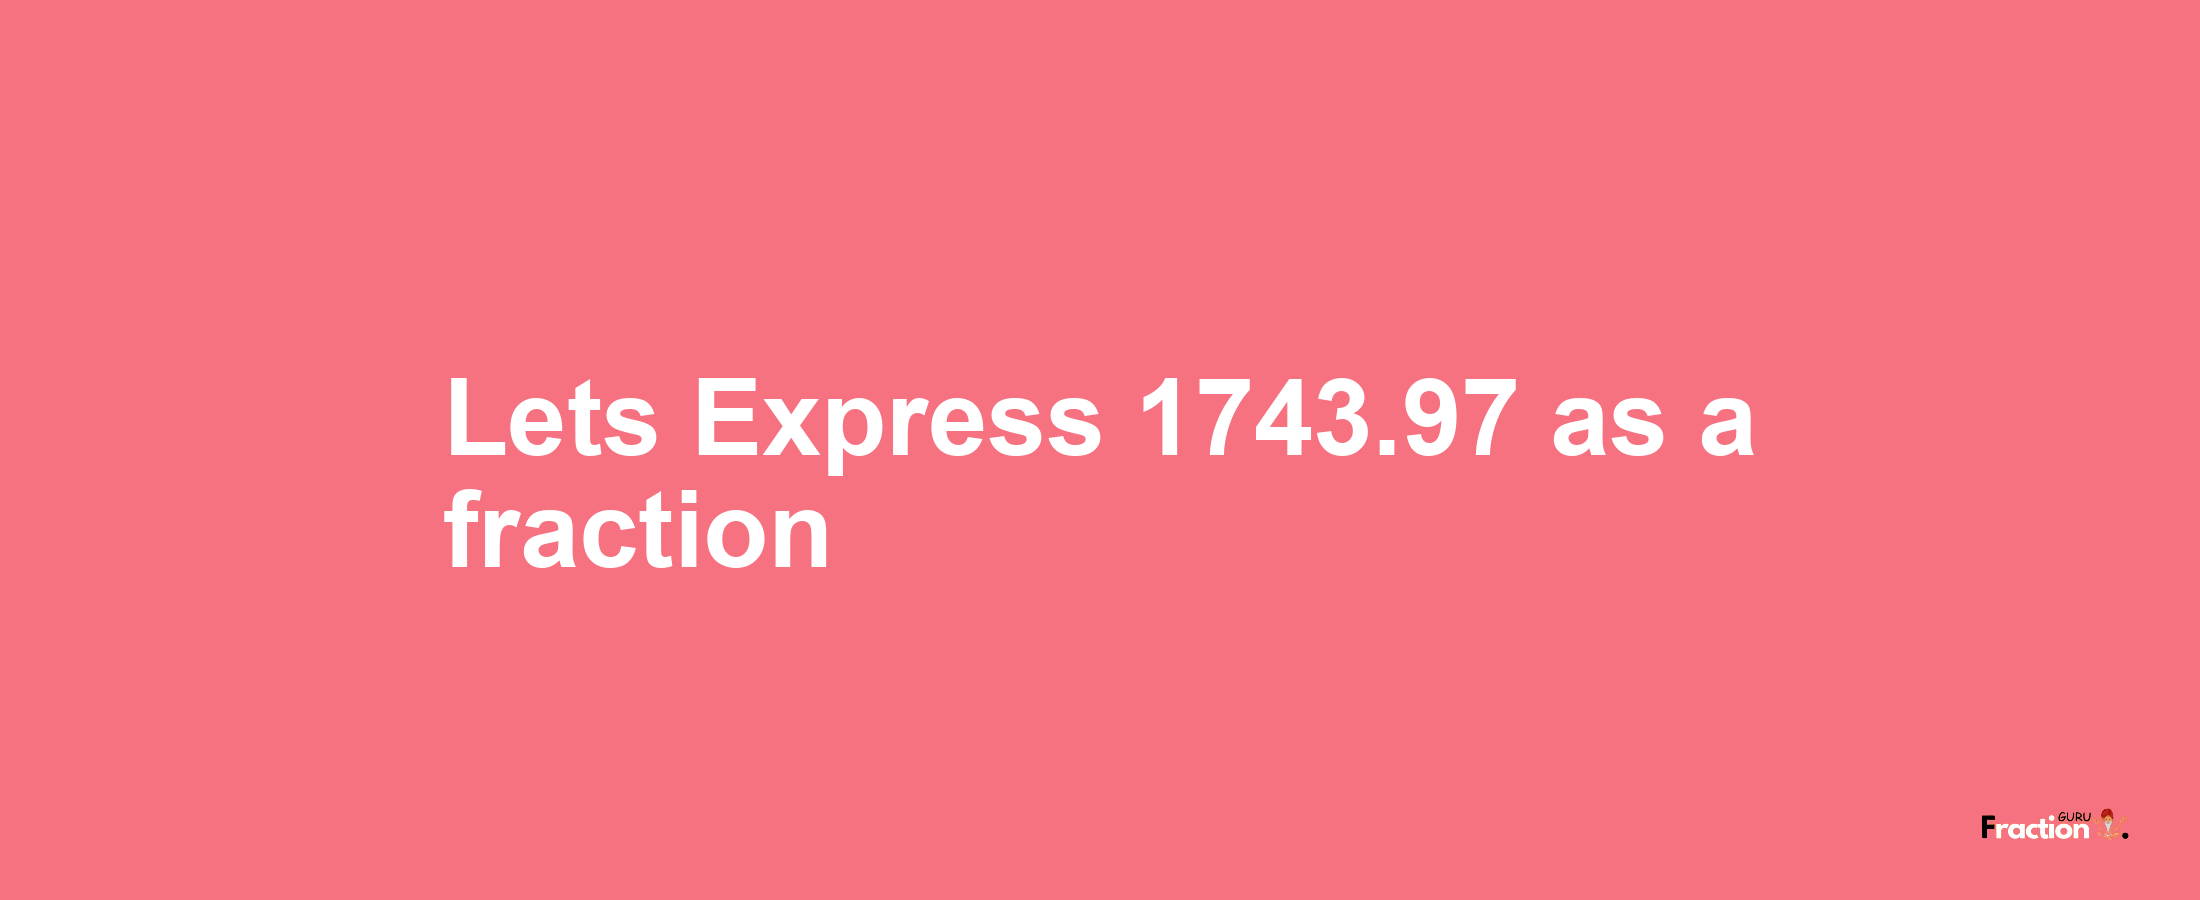 Lets Express 1743.97 as afraction